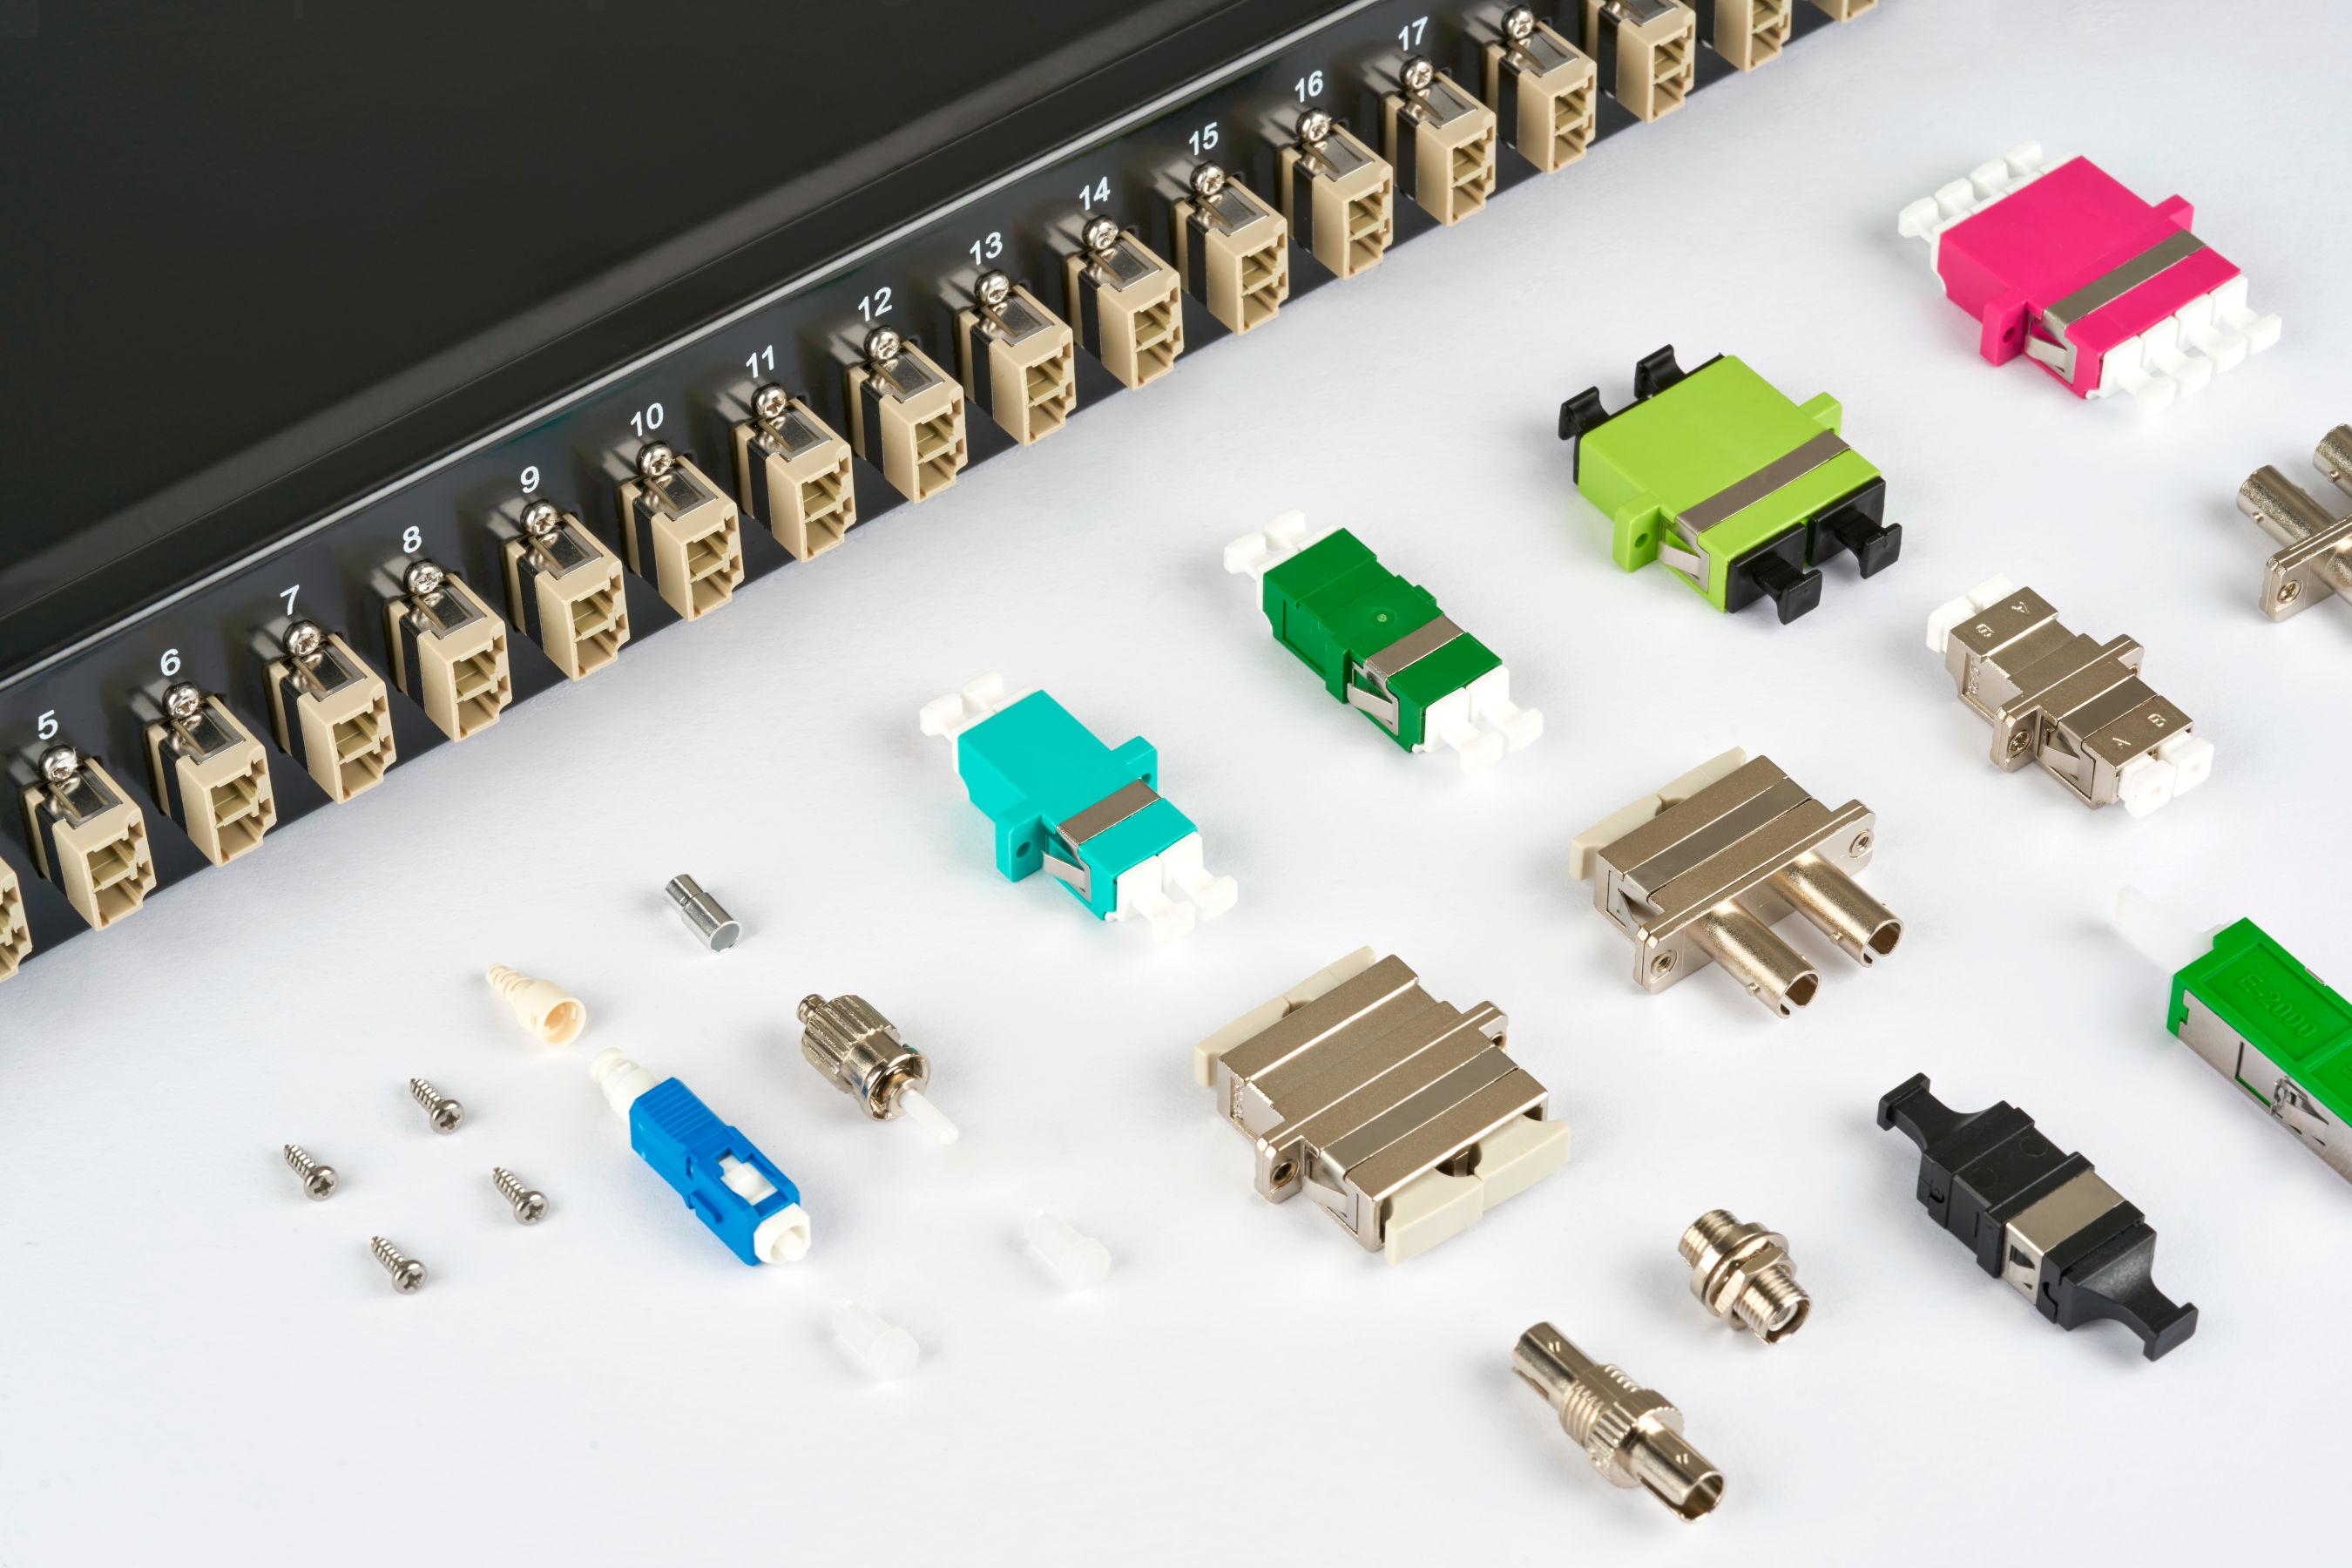 Various fiber optic connectors and couplers in front of a patch panel with numbered ports.